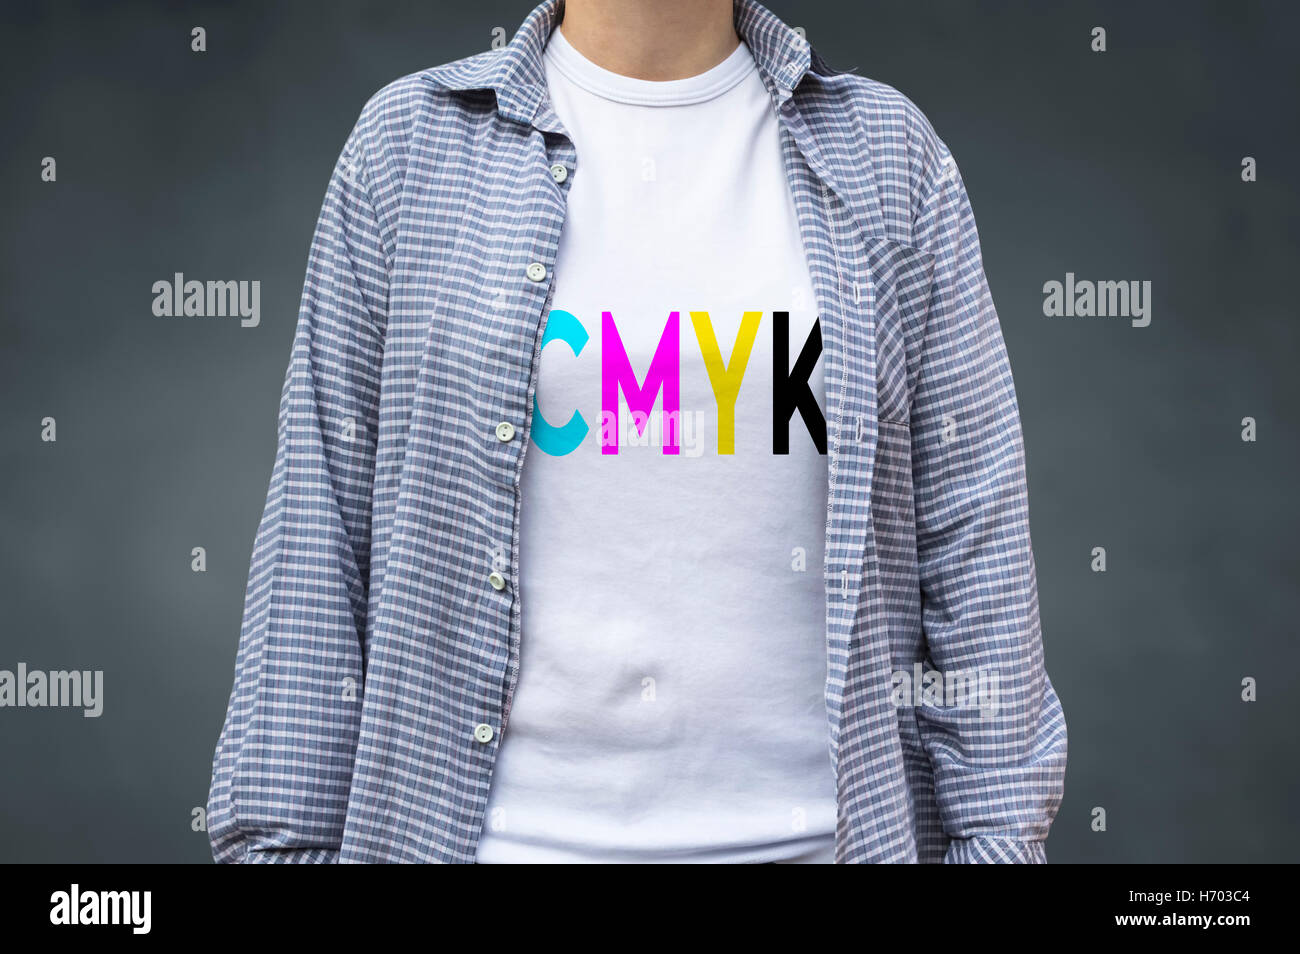 CMYK digital printing on T-shirt, cyan, magenta, yellow and black letters. Selective focus. Stock Photo